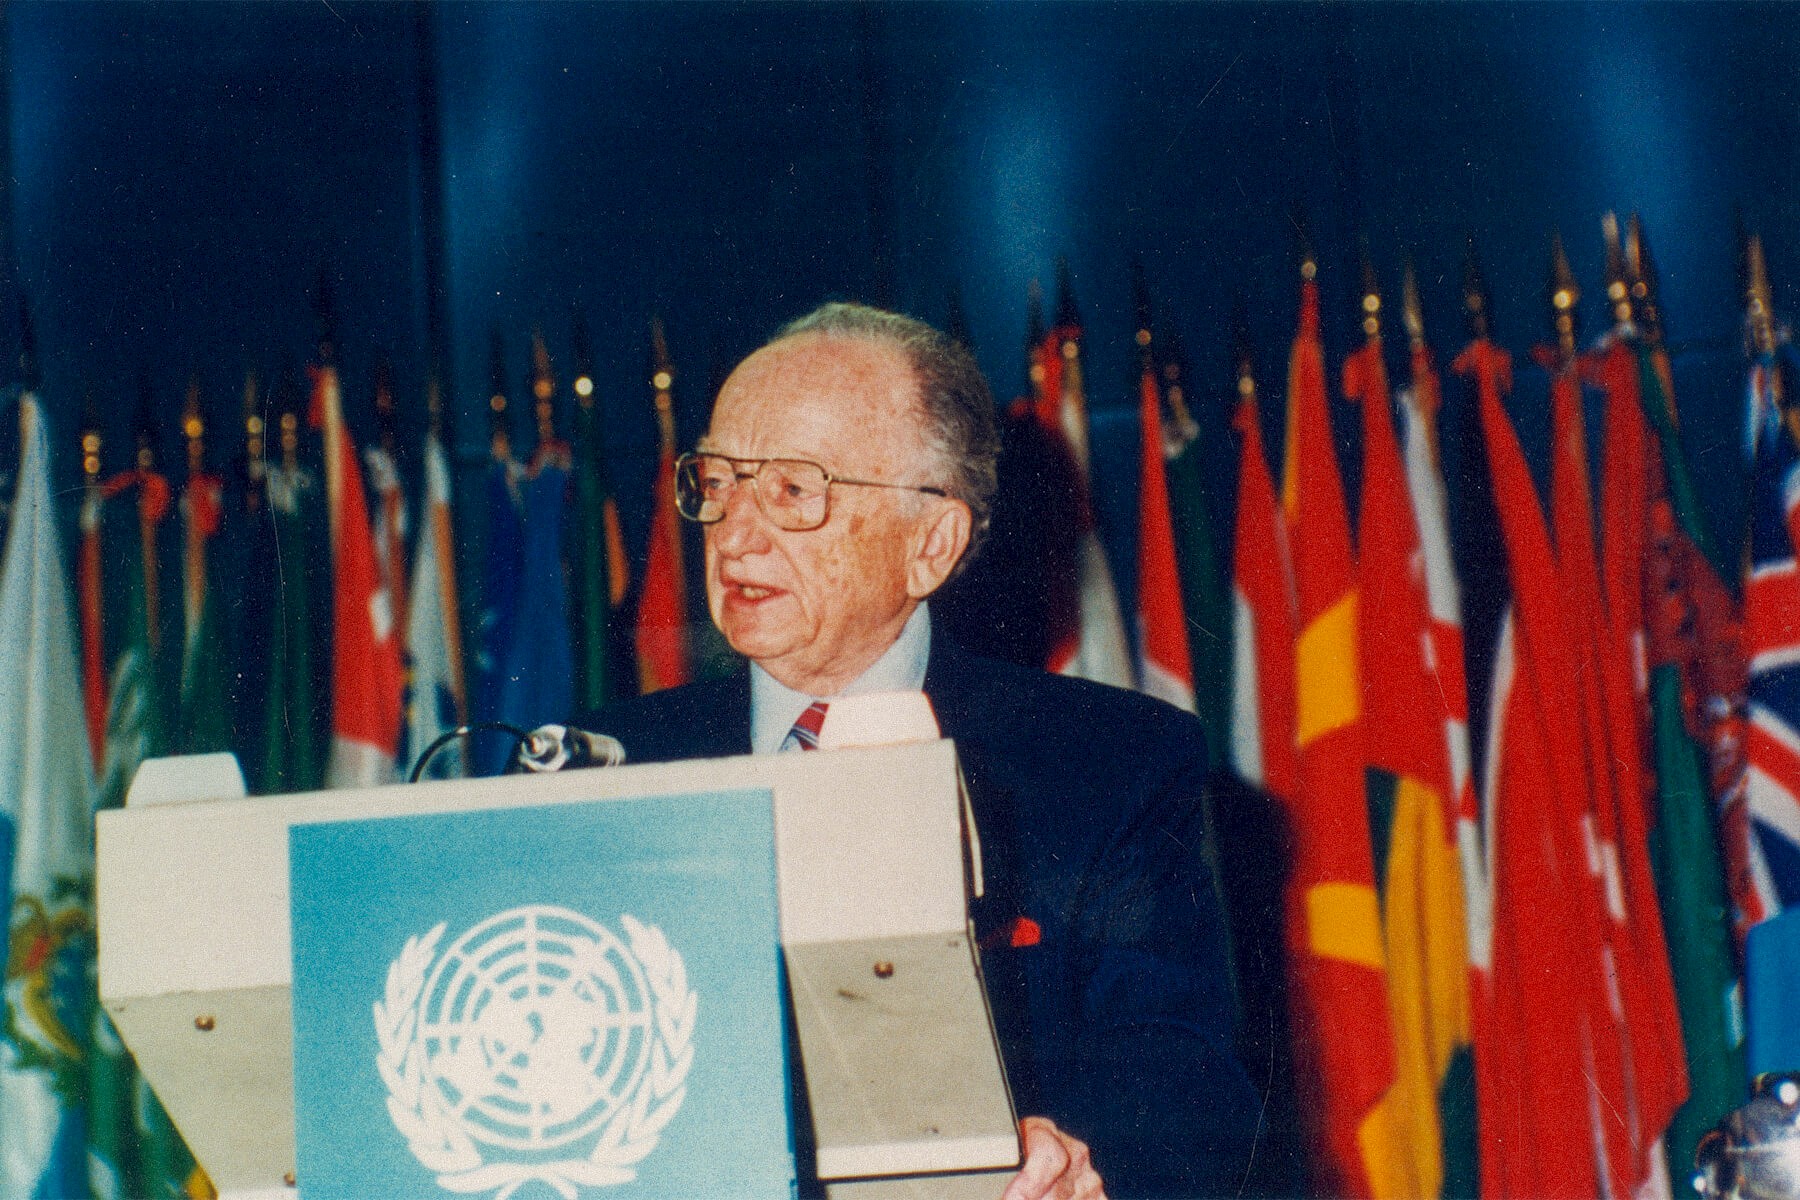 Ben Ferencz speaks at the UN ICC, Rome, Italy. June 2, 1998.